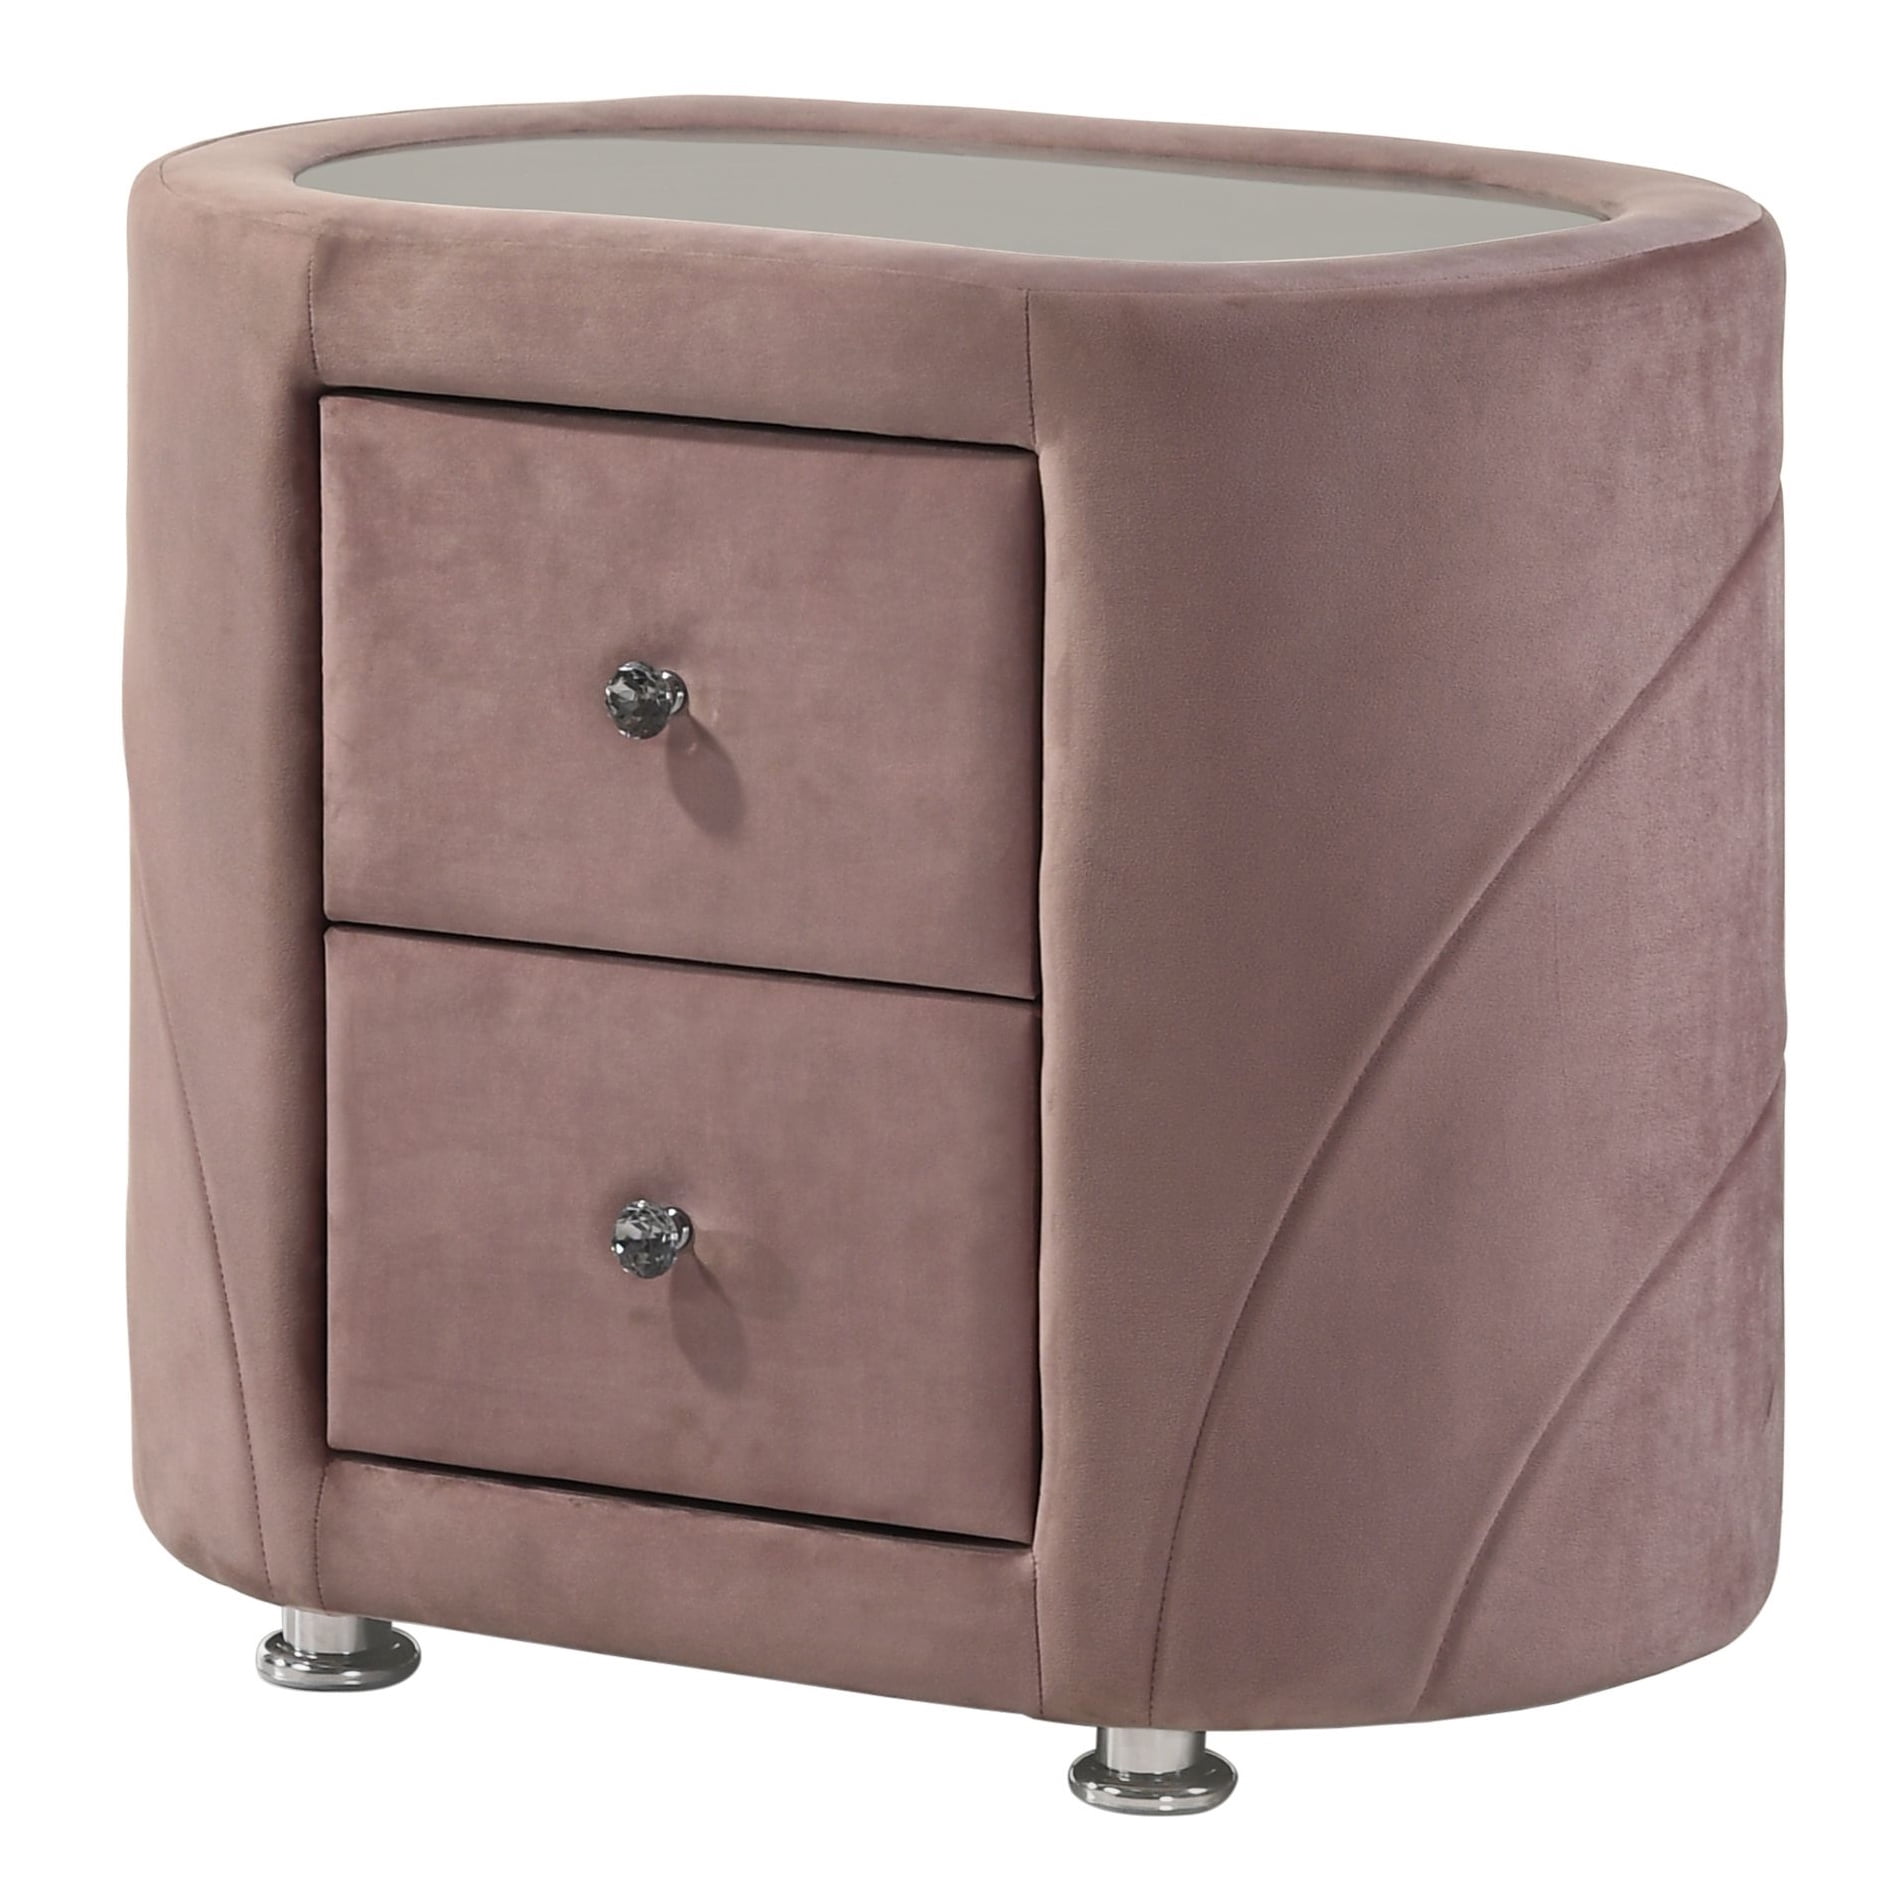 Picture of Acme Furniture BD01184 29 x 19 x 23 in. Salonia Nightstand, Pink Velvet